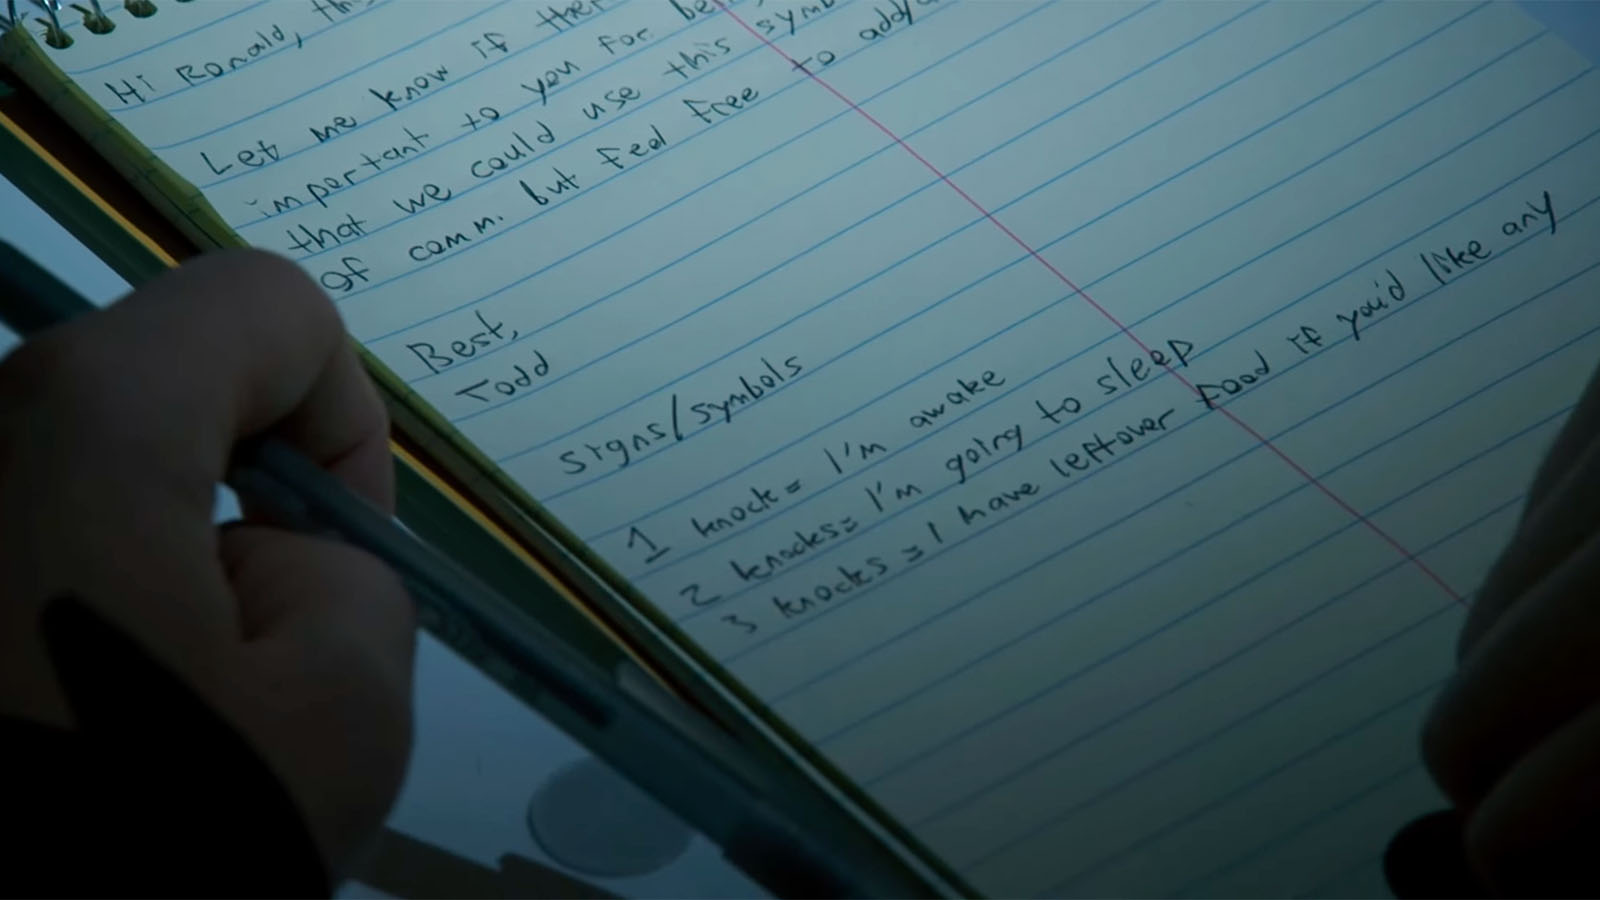 Todd creates a list of knock codes to be used from his adjacent hotel room.